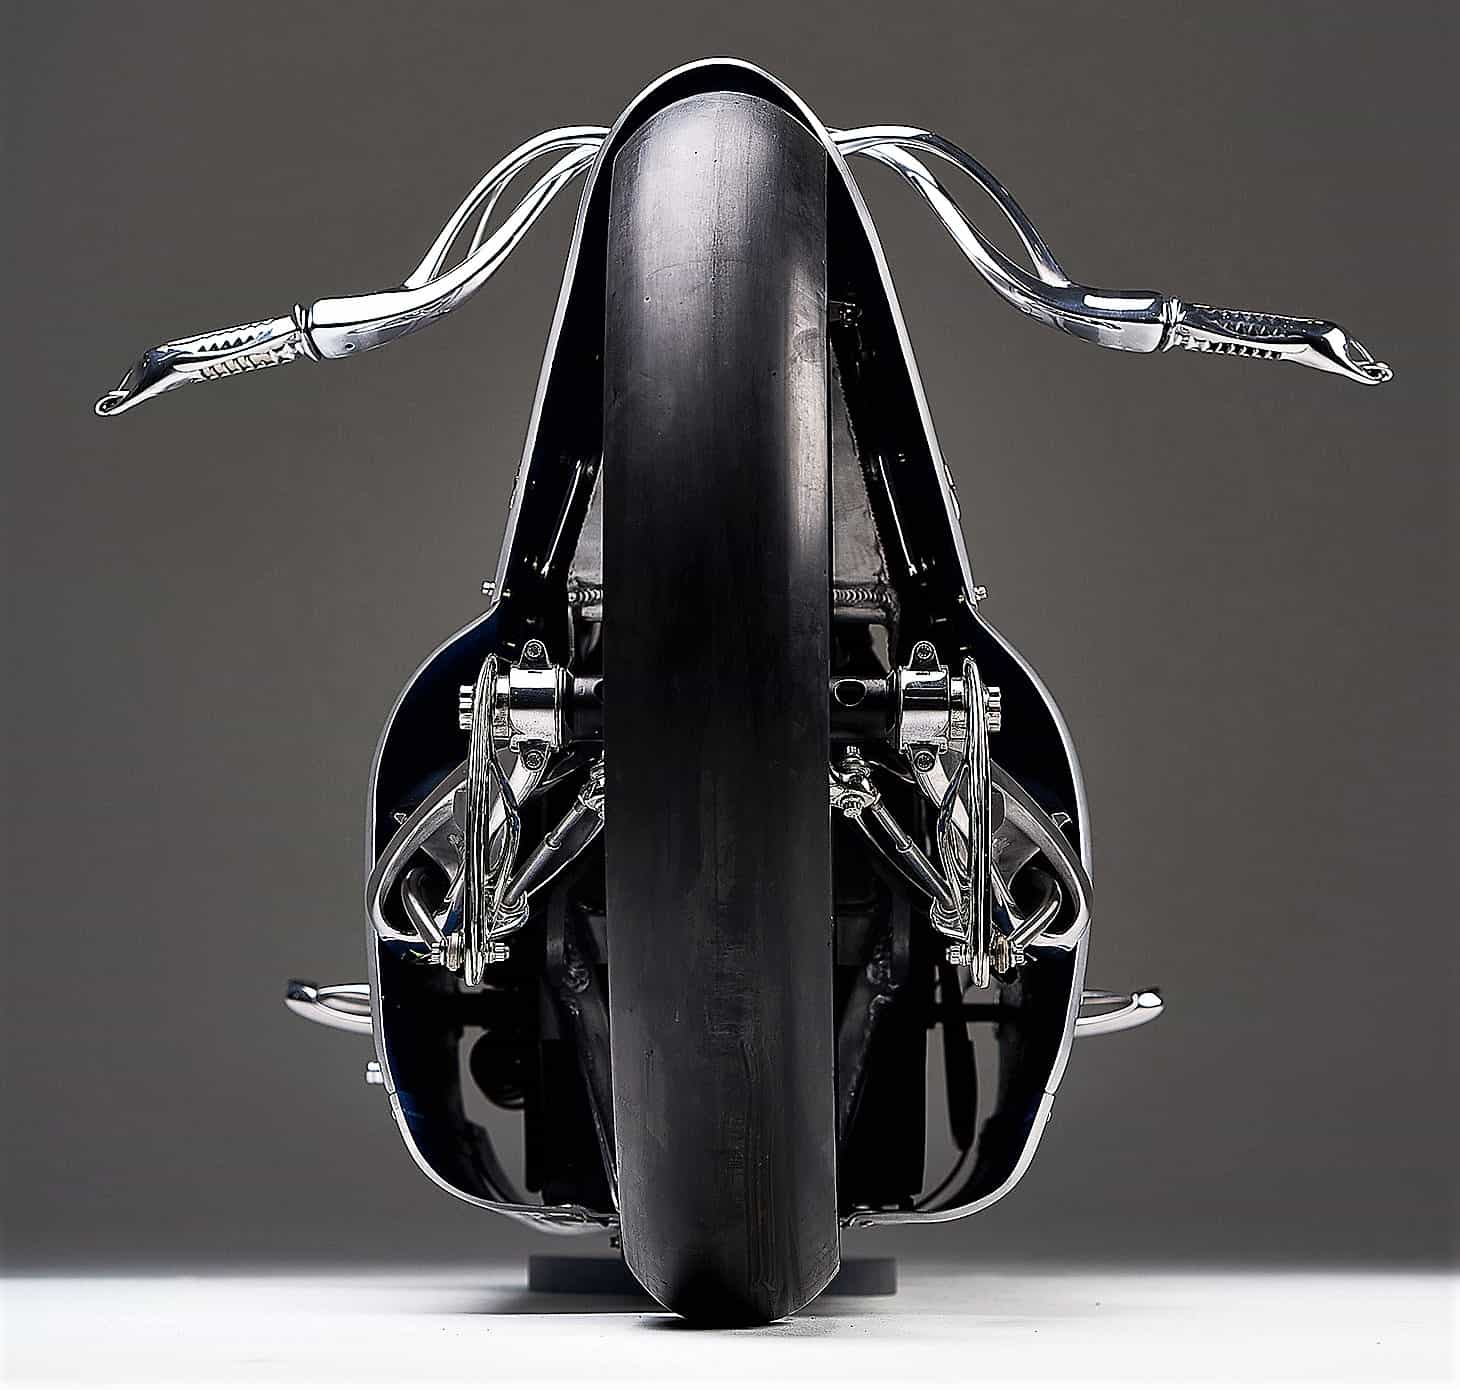 custom motorcycle, Video of the Day: Unique, visionary motorcycle unveiled as pure artwork, ClassicCars.com Journal